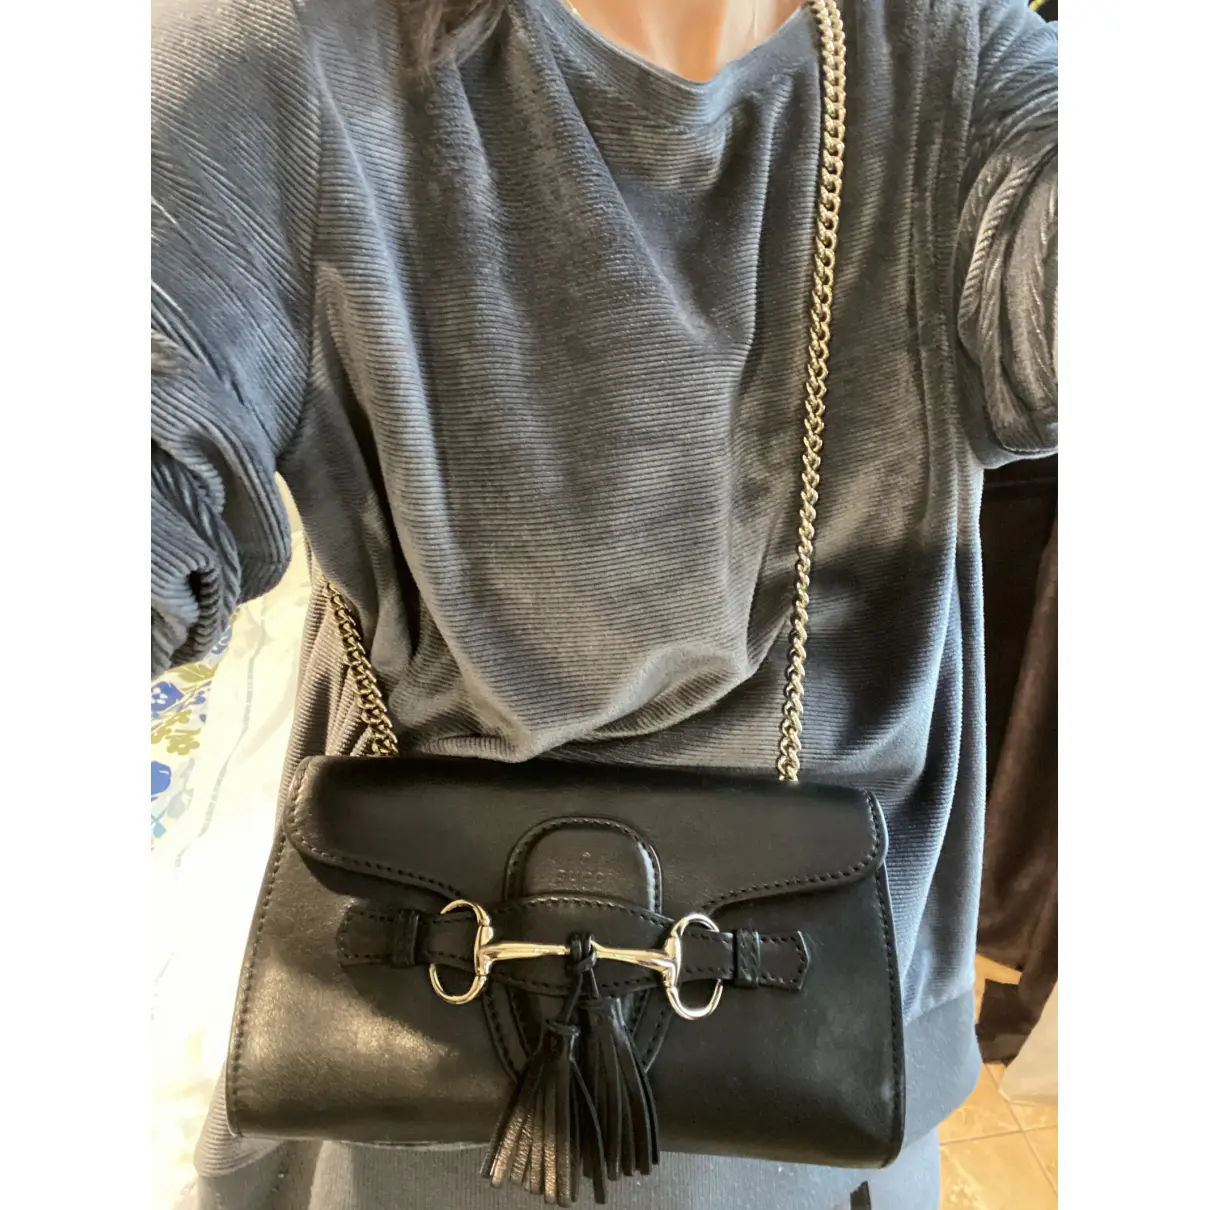 Emily leather clutch bag Gucci